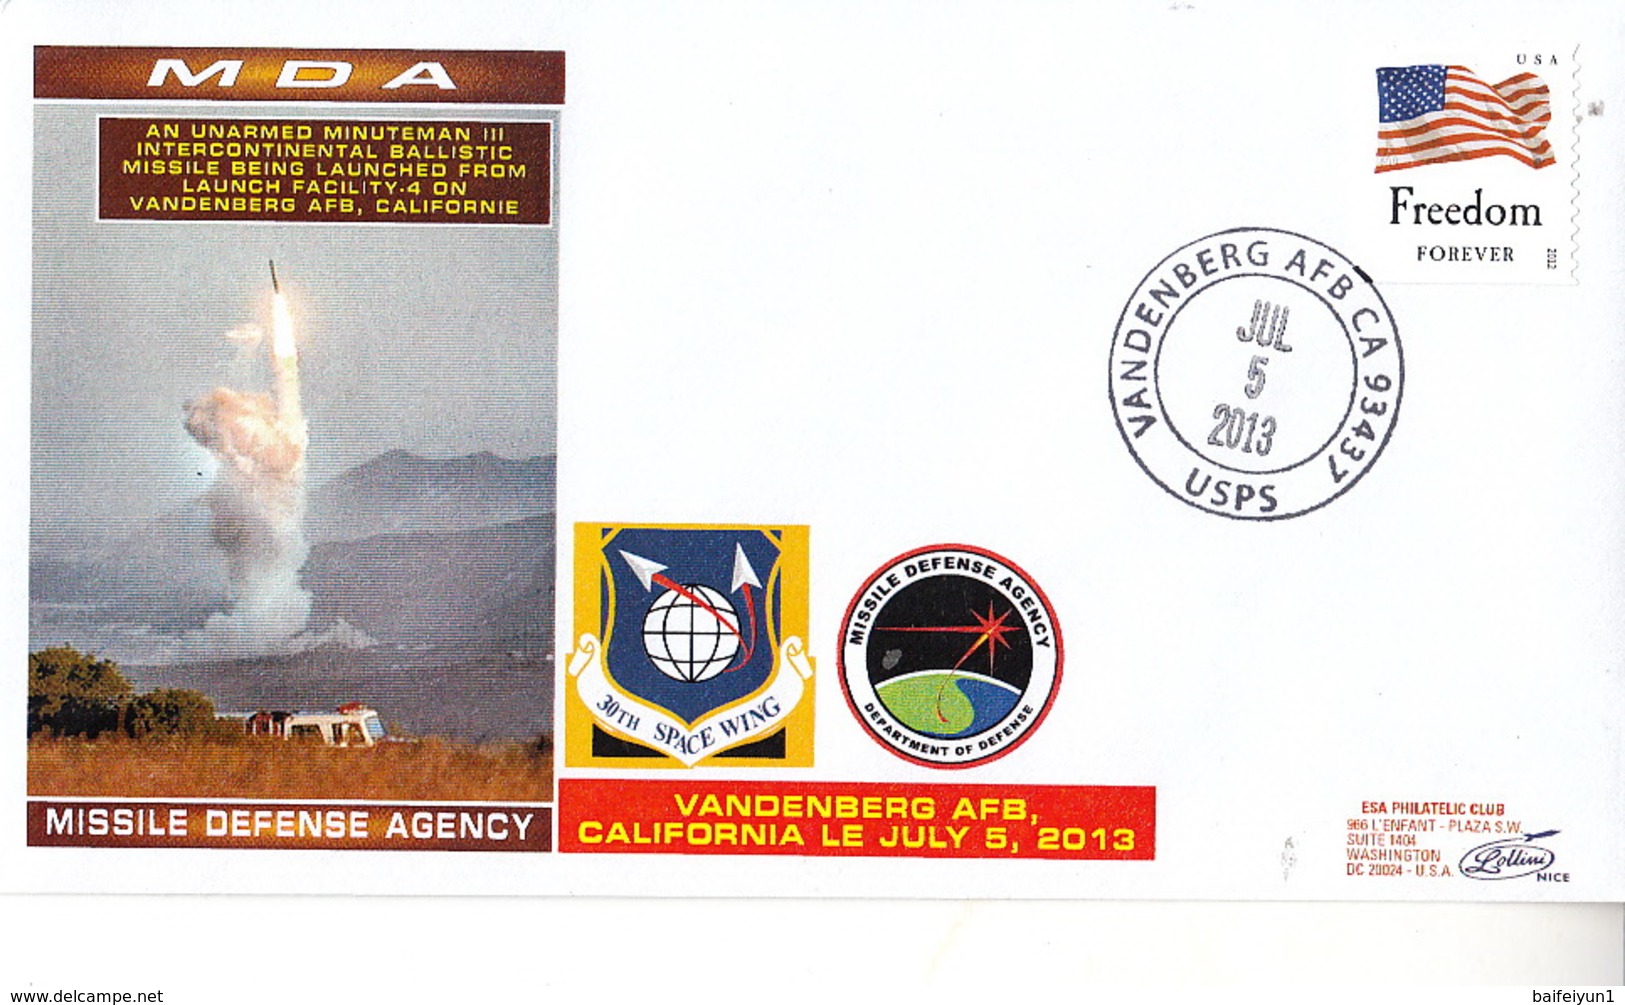 USA 2013  An Unarmed Minuteman III Intercontinental Ballistic Missile Begin Launched  Commemorative Cover - North  America